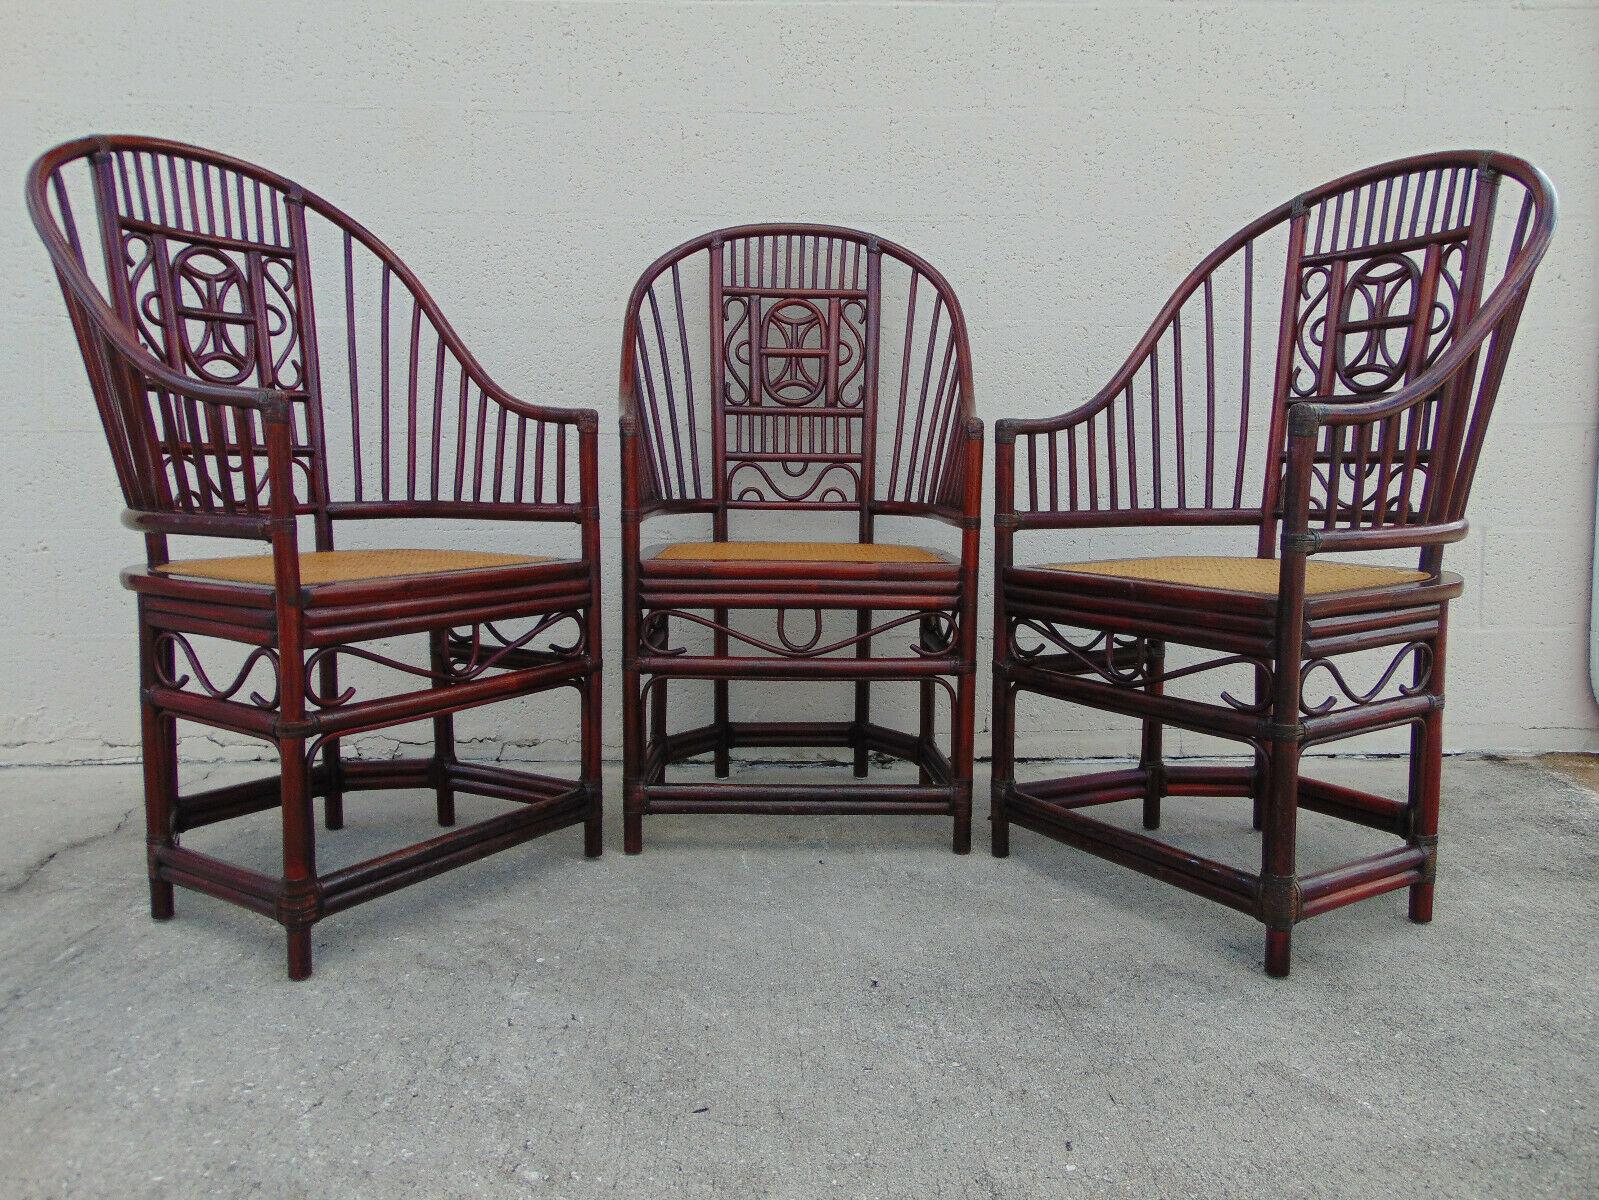 Vintage Brighton Pavilion style rattan armchairs with original finish and cane seating. A graceful rattan frame is decorated with open fretwork featuring a scroll pattern. Indian River Plantation plaque.

Chairs retain their vintage character with